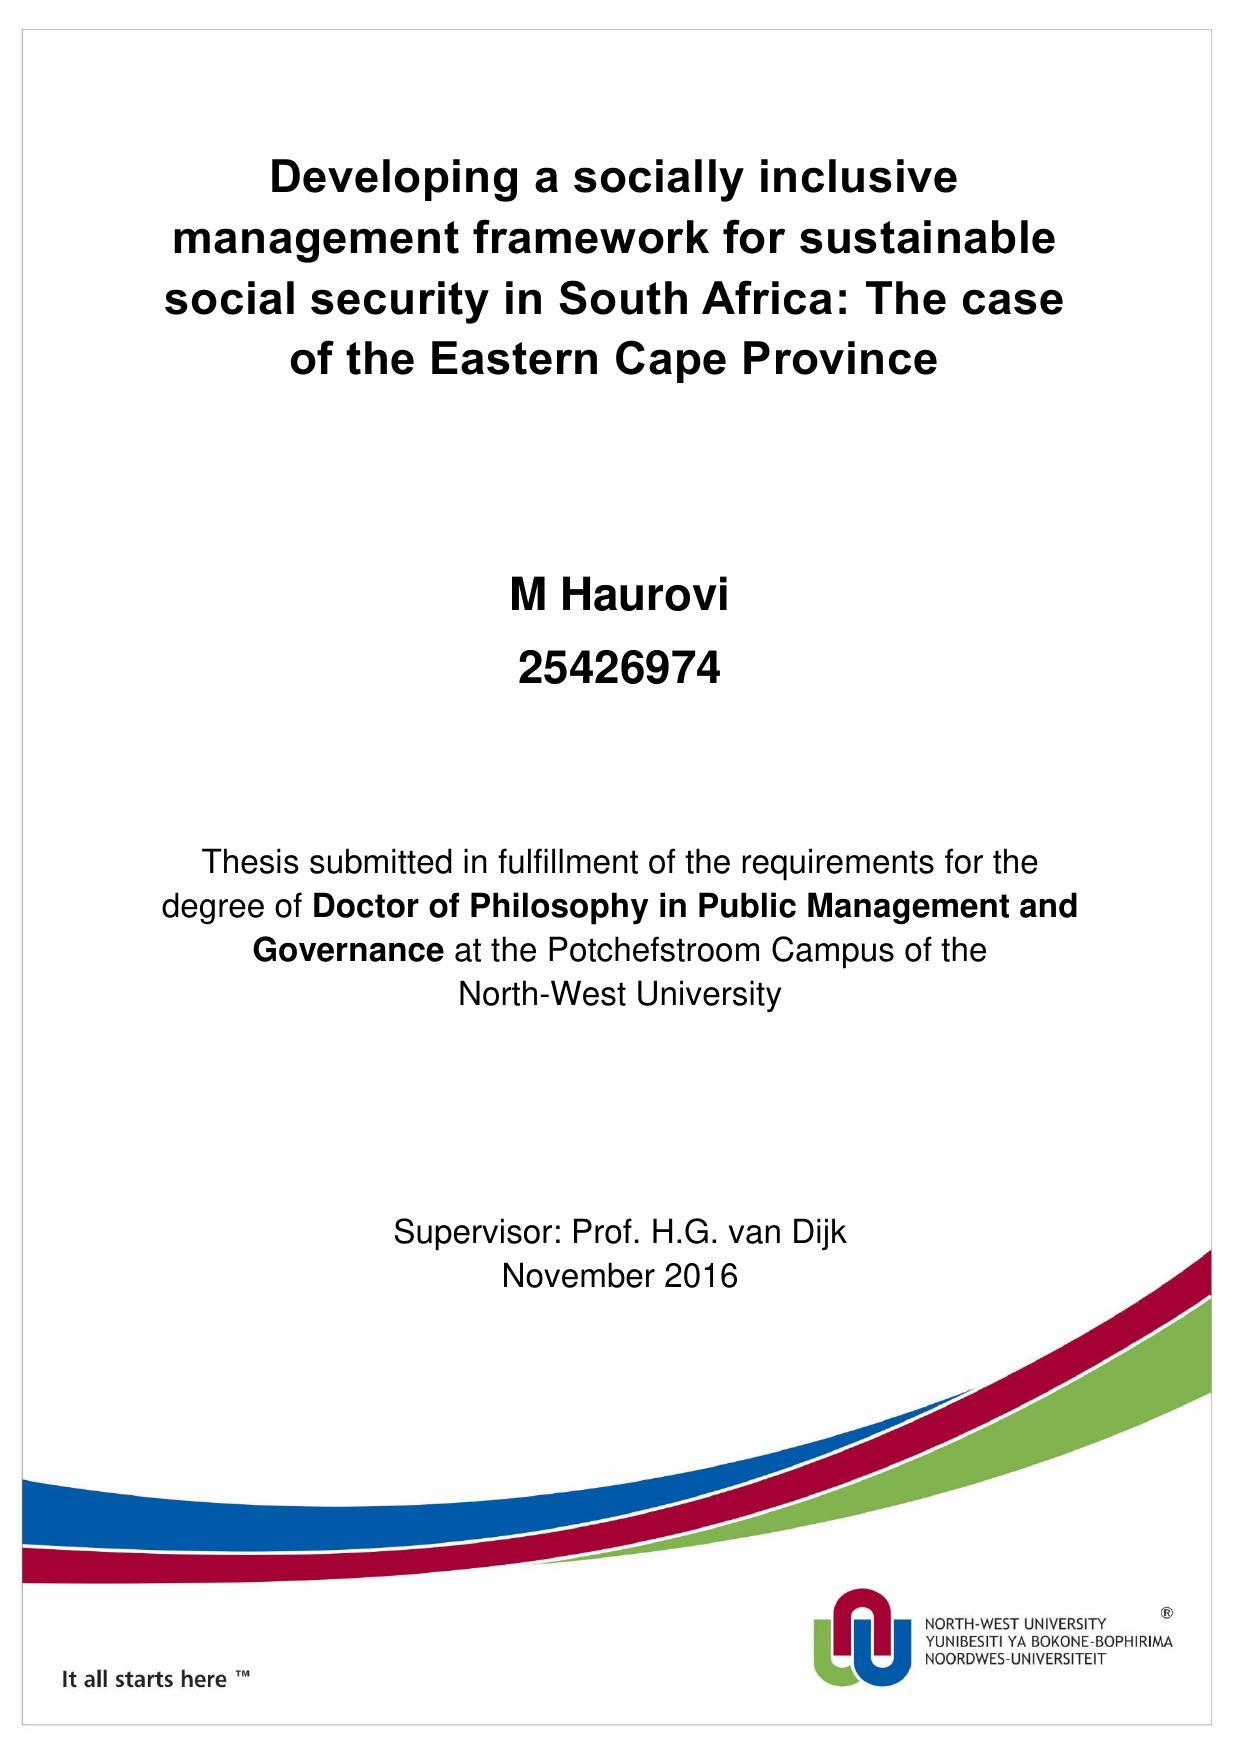 Developing a socially inclusive management framework for sustainable social security in South Africa 2018 PDF